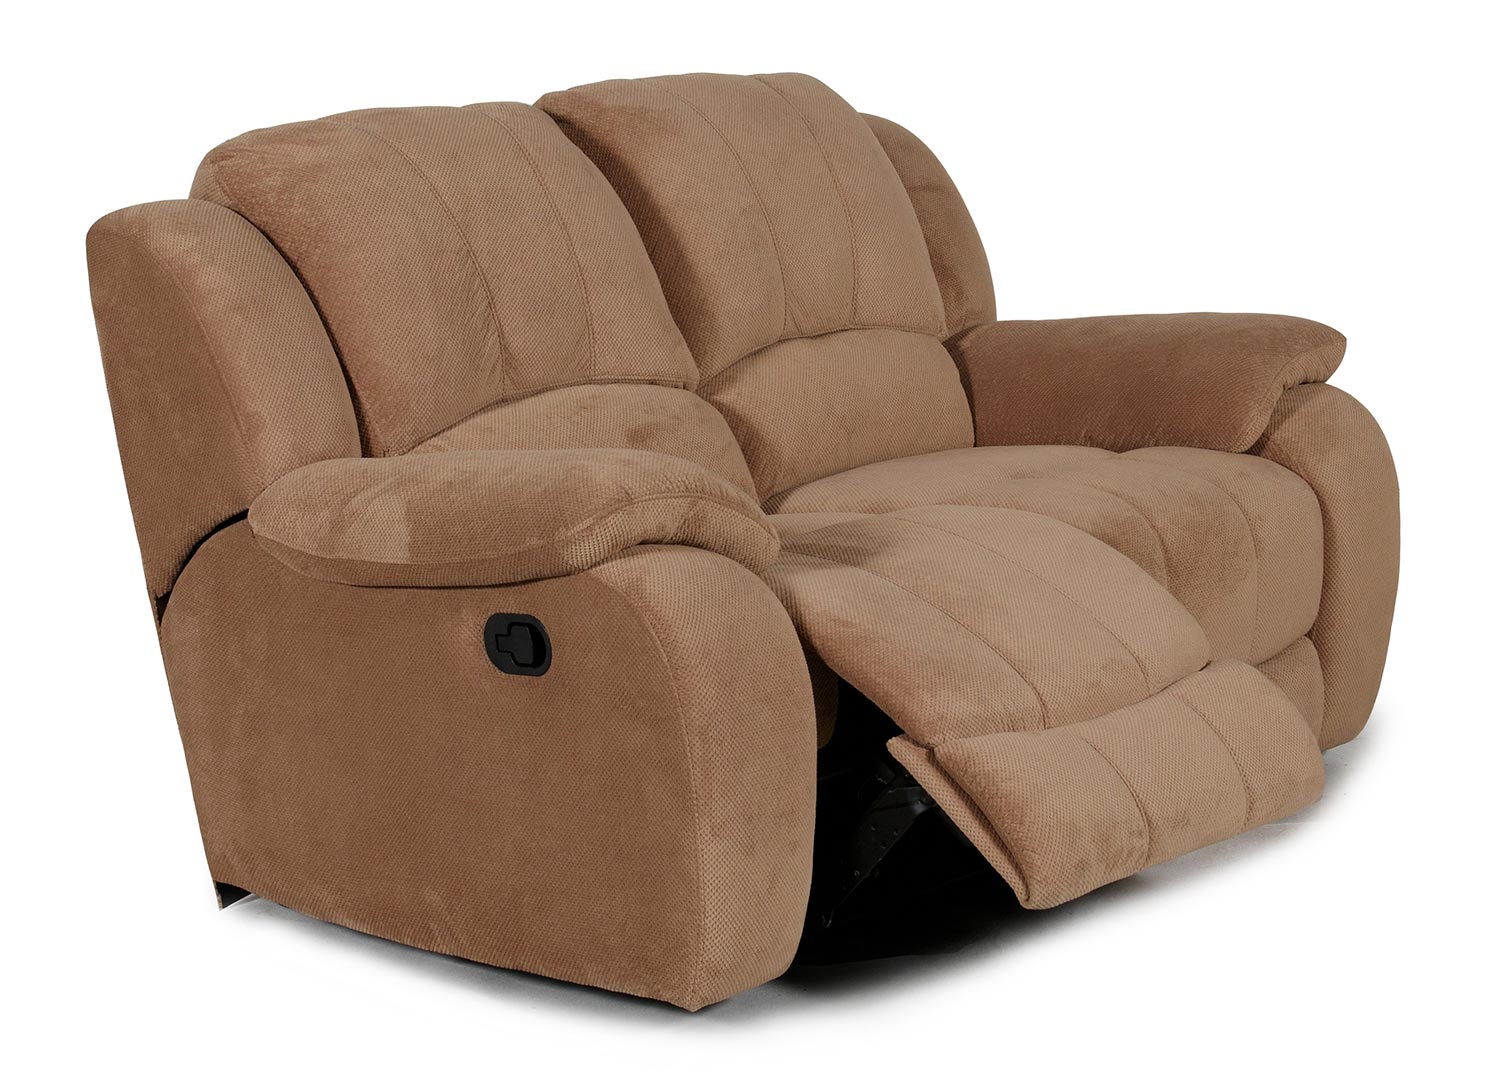 Barcalounger Triumph ll Casual Comforts Reclining Loveseat - Taupe